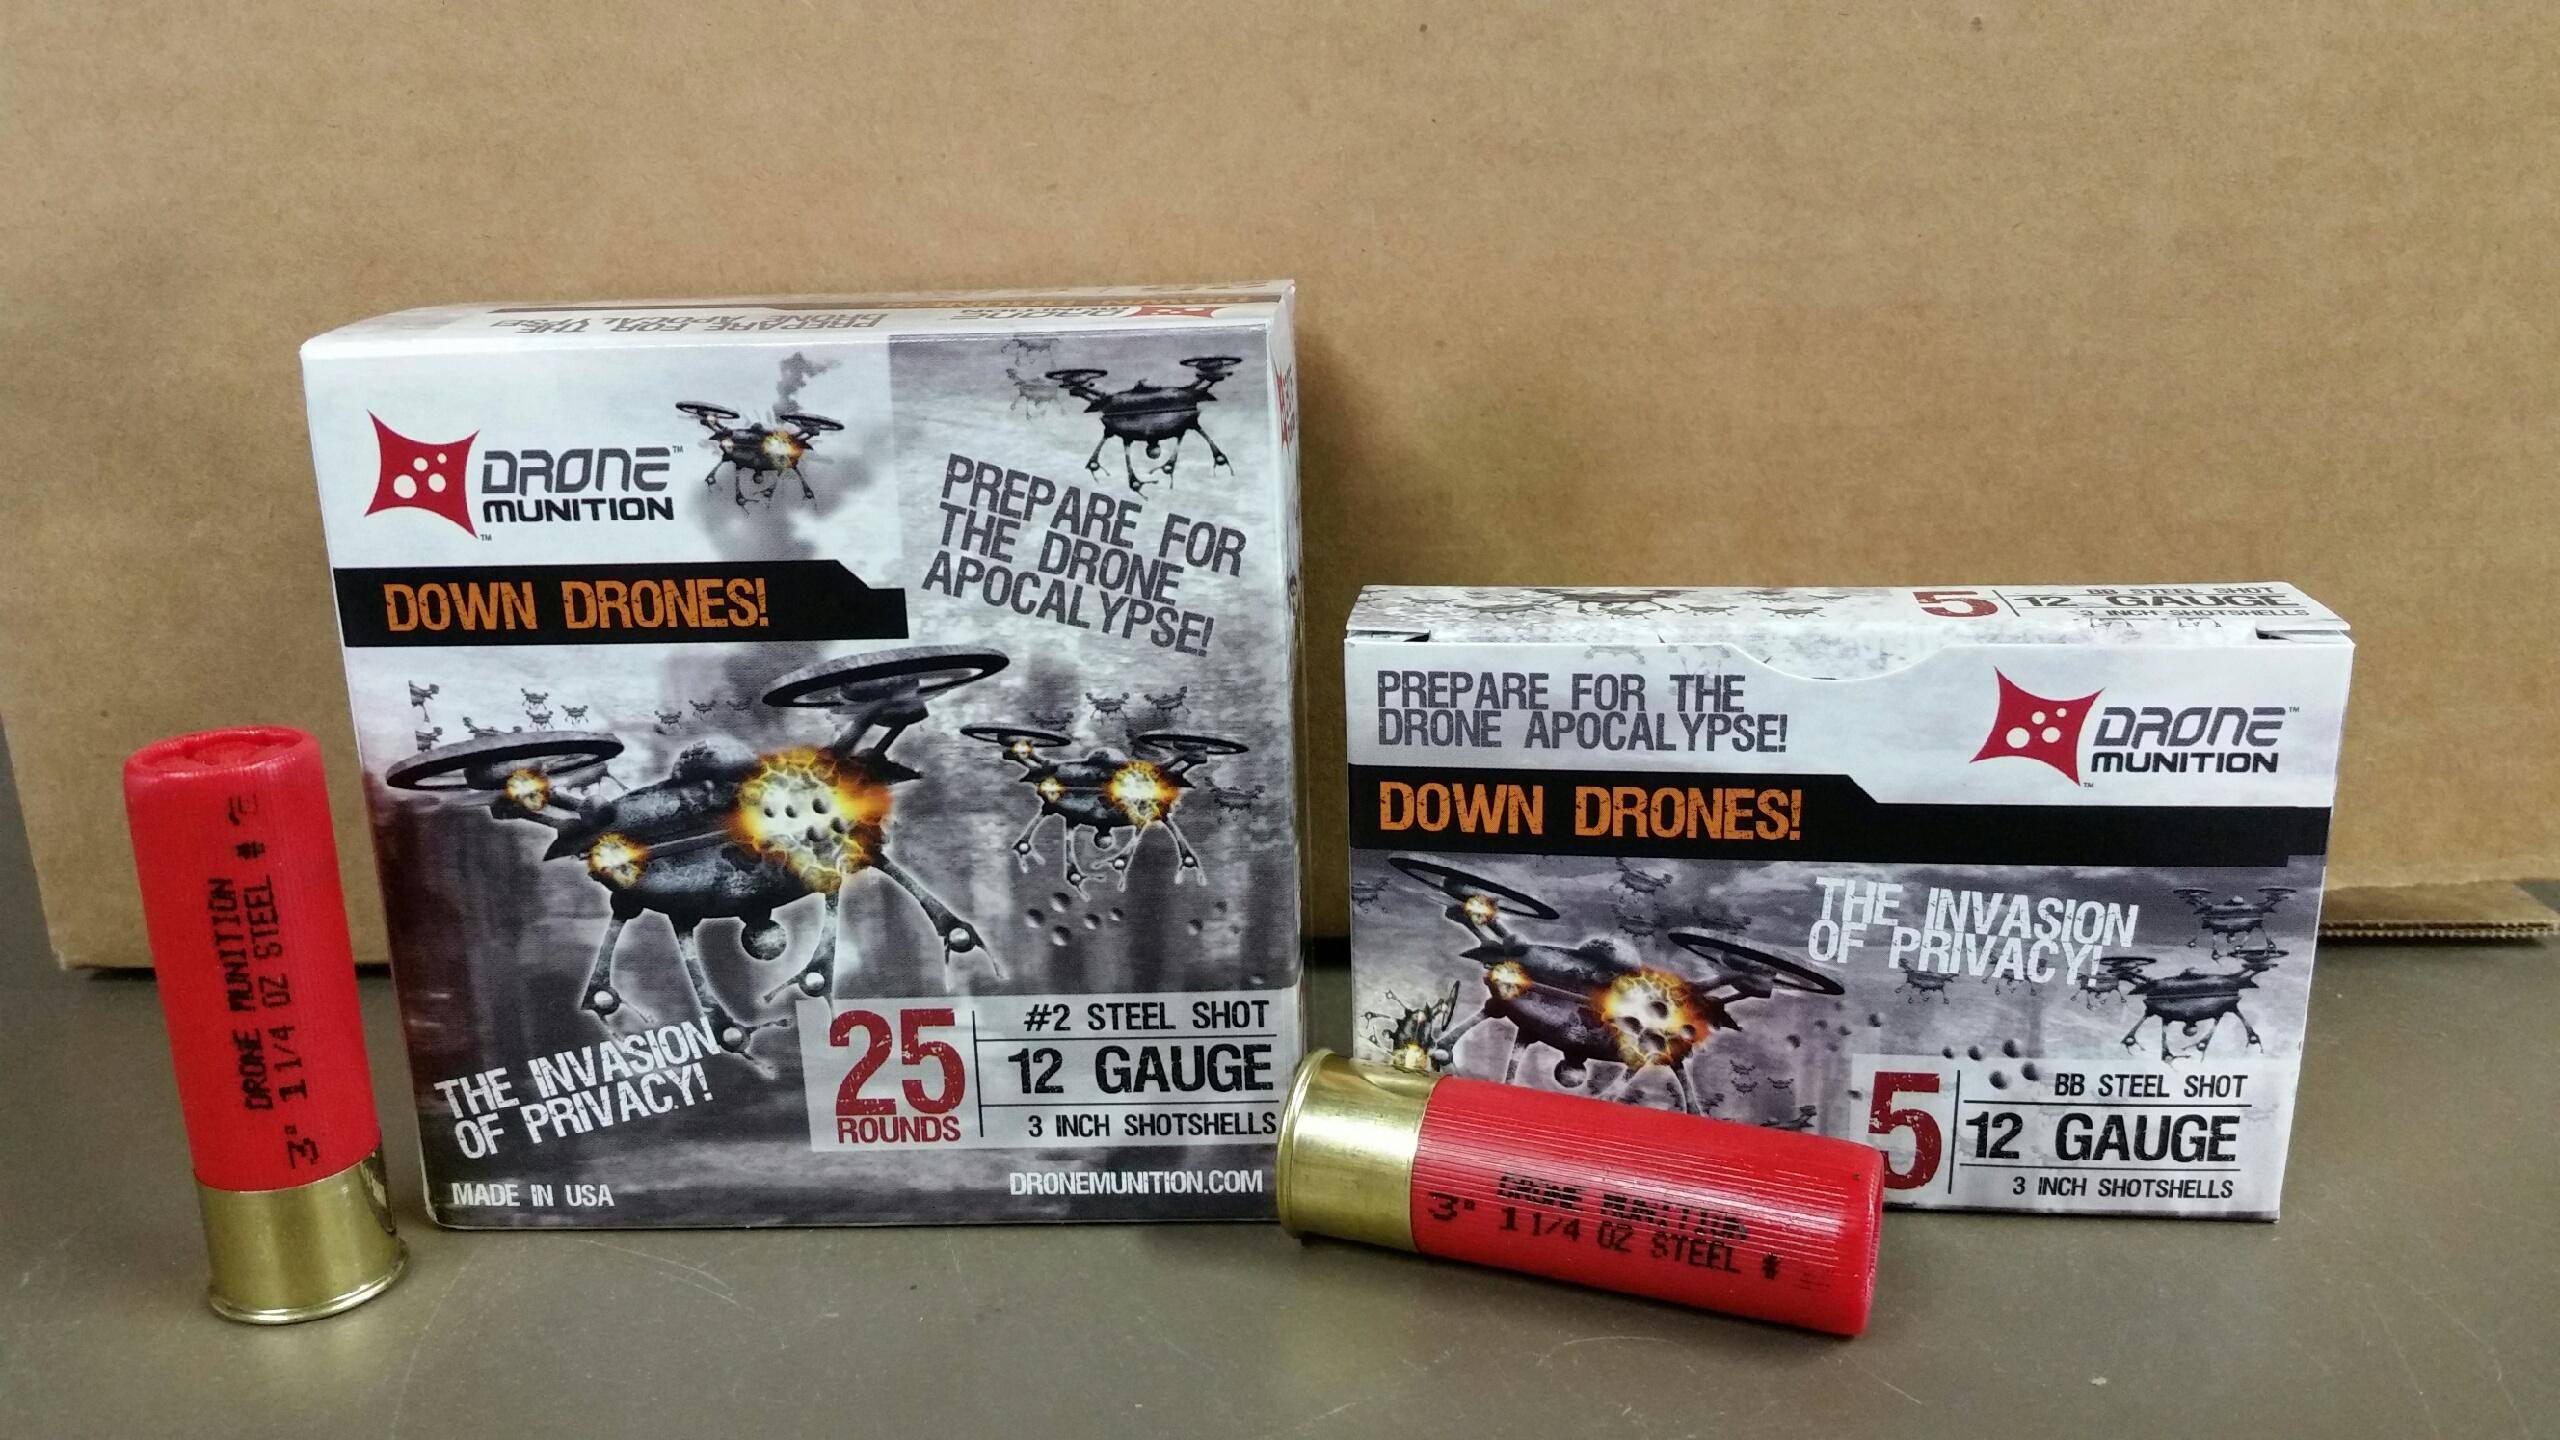 Snake River Shooting Announces Drone Munition Now Shipping